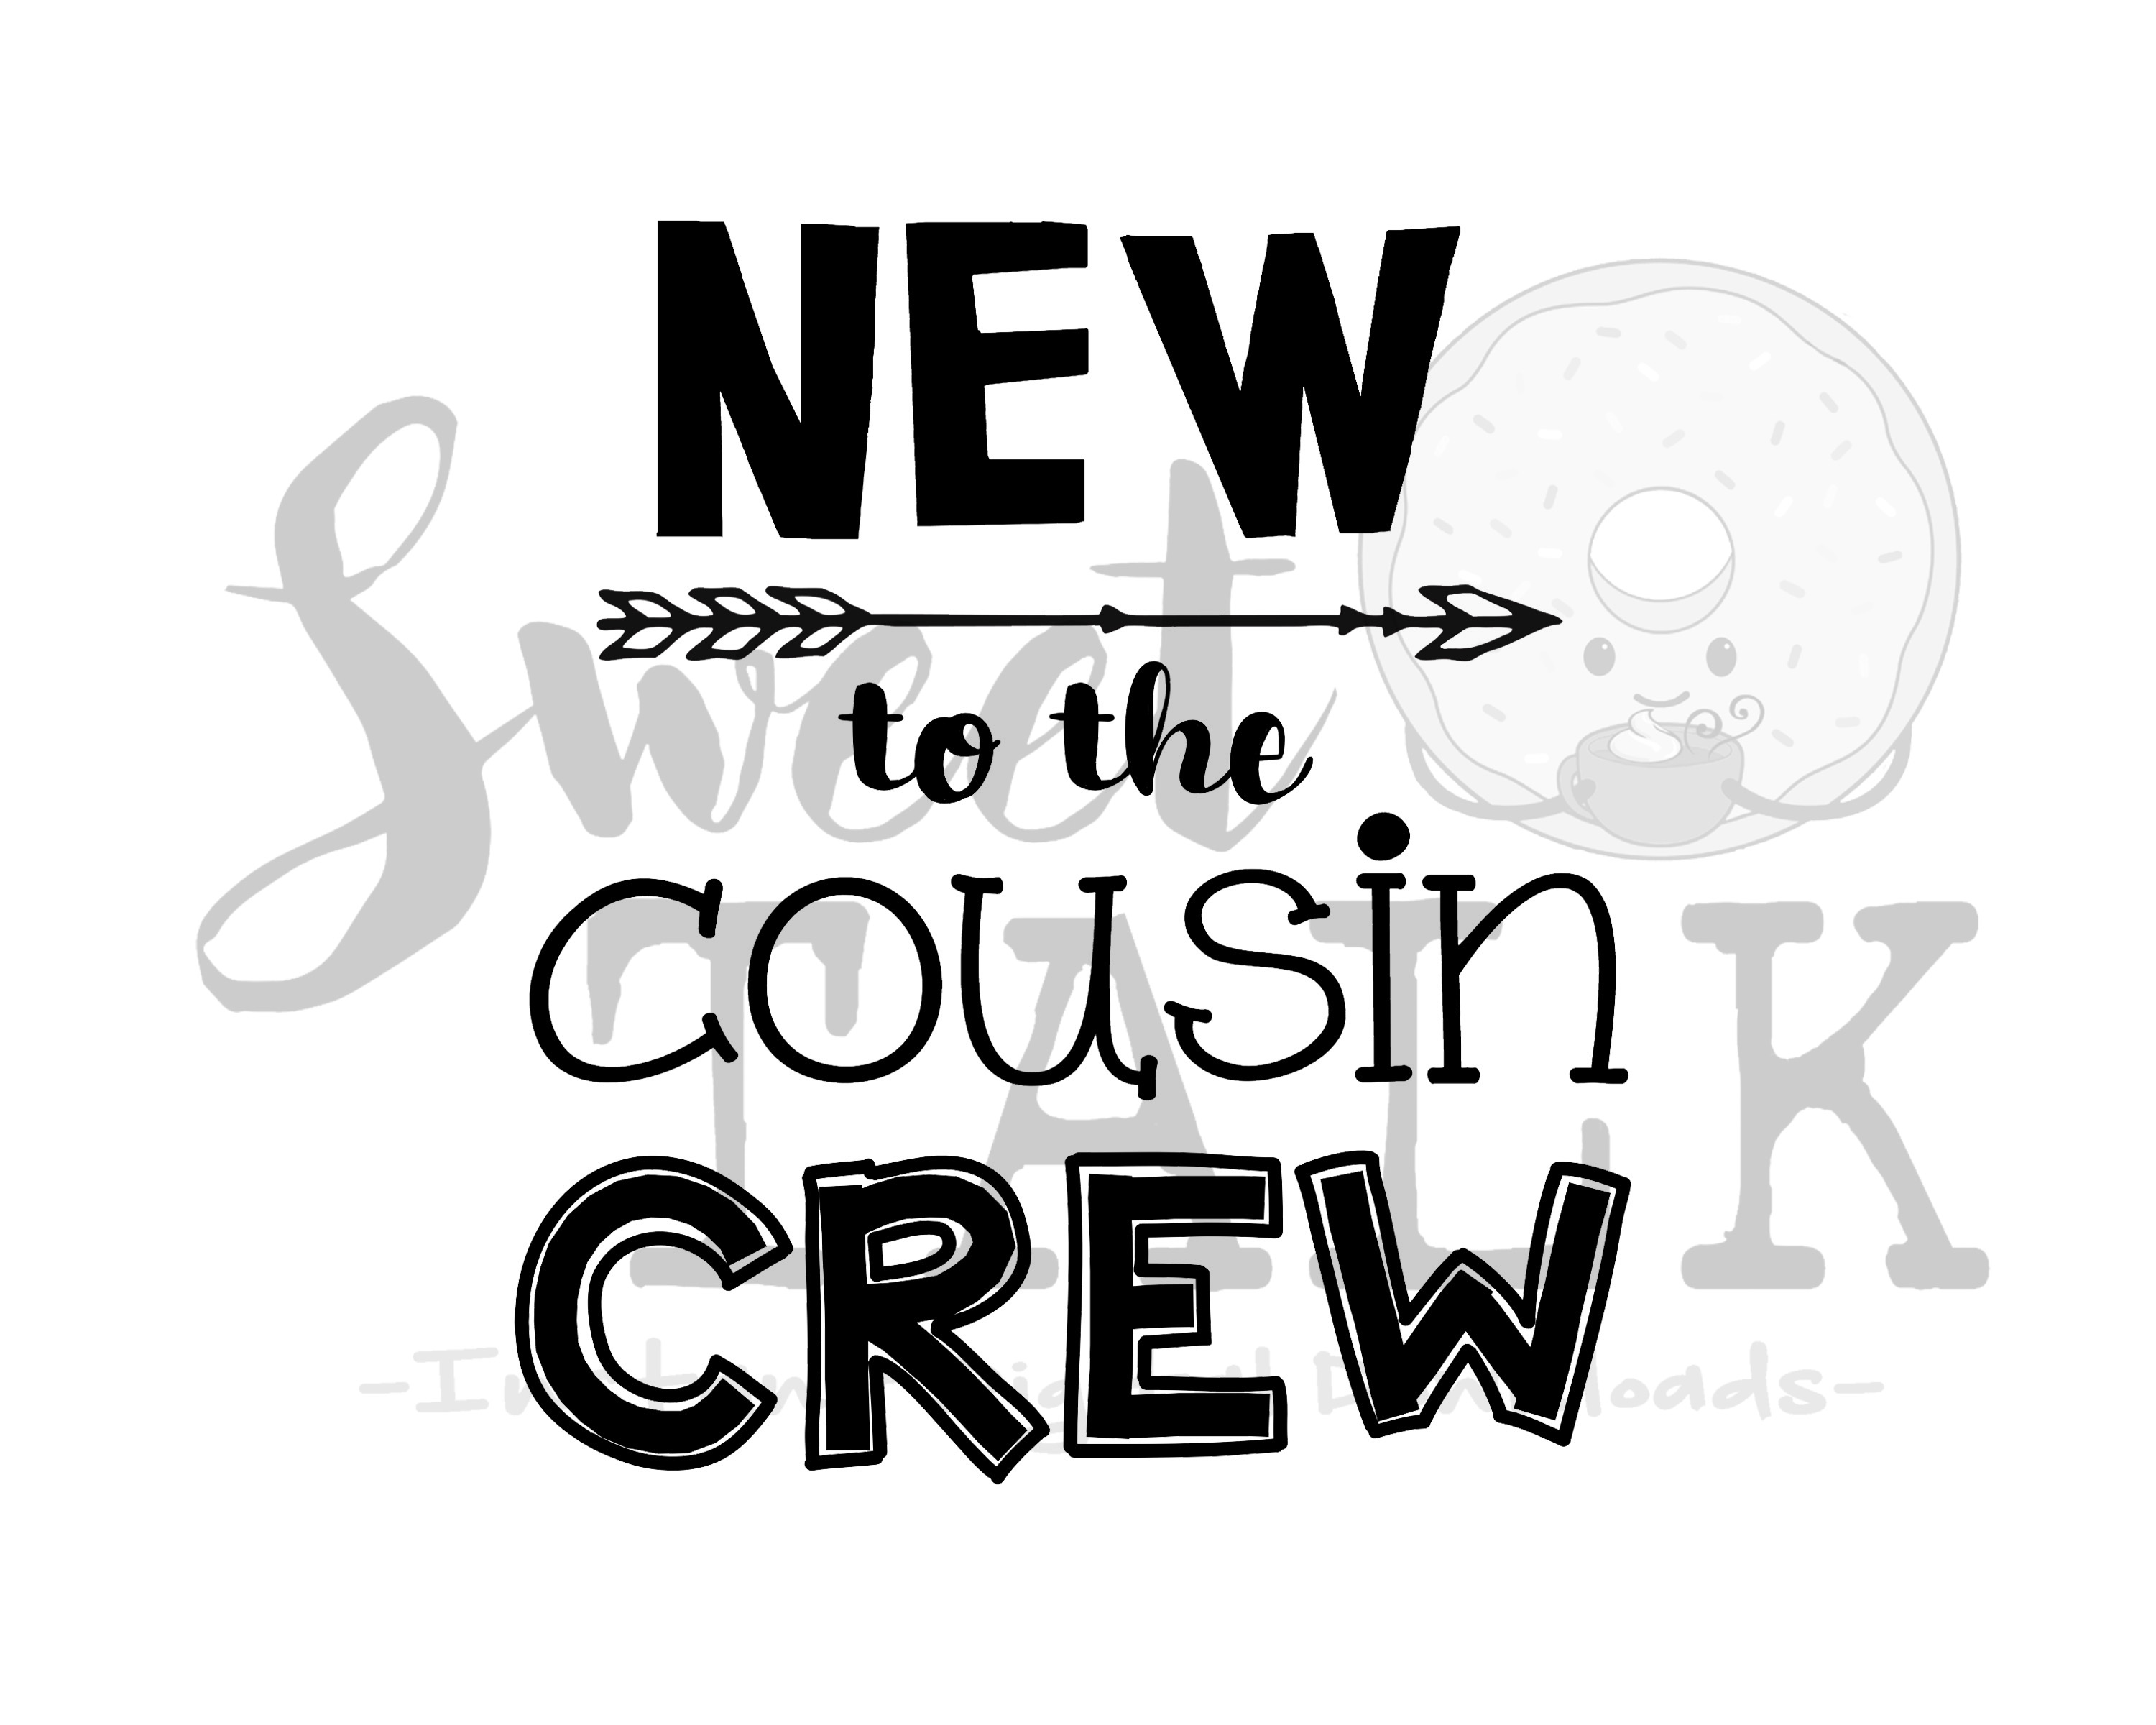 Download New to the cousin crew svg, png, jpg, dxf/Instant Digital ...